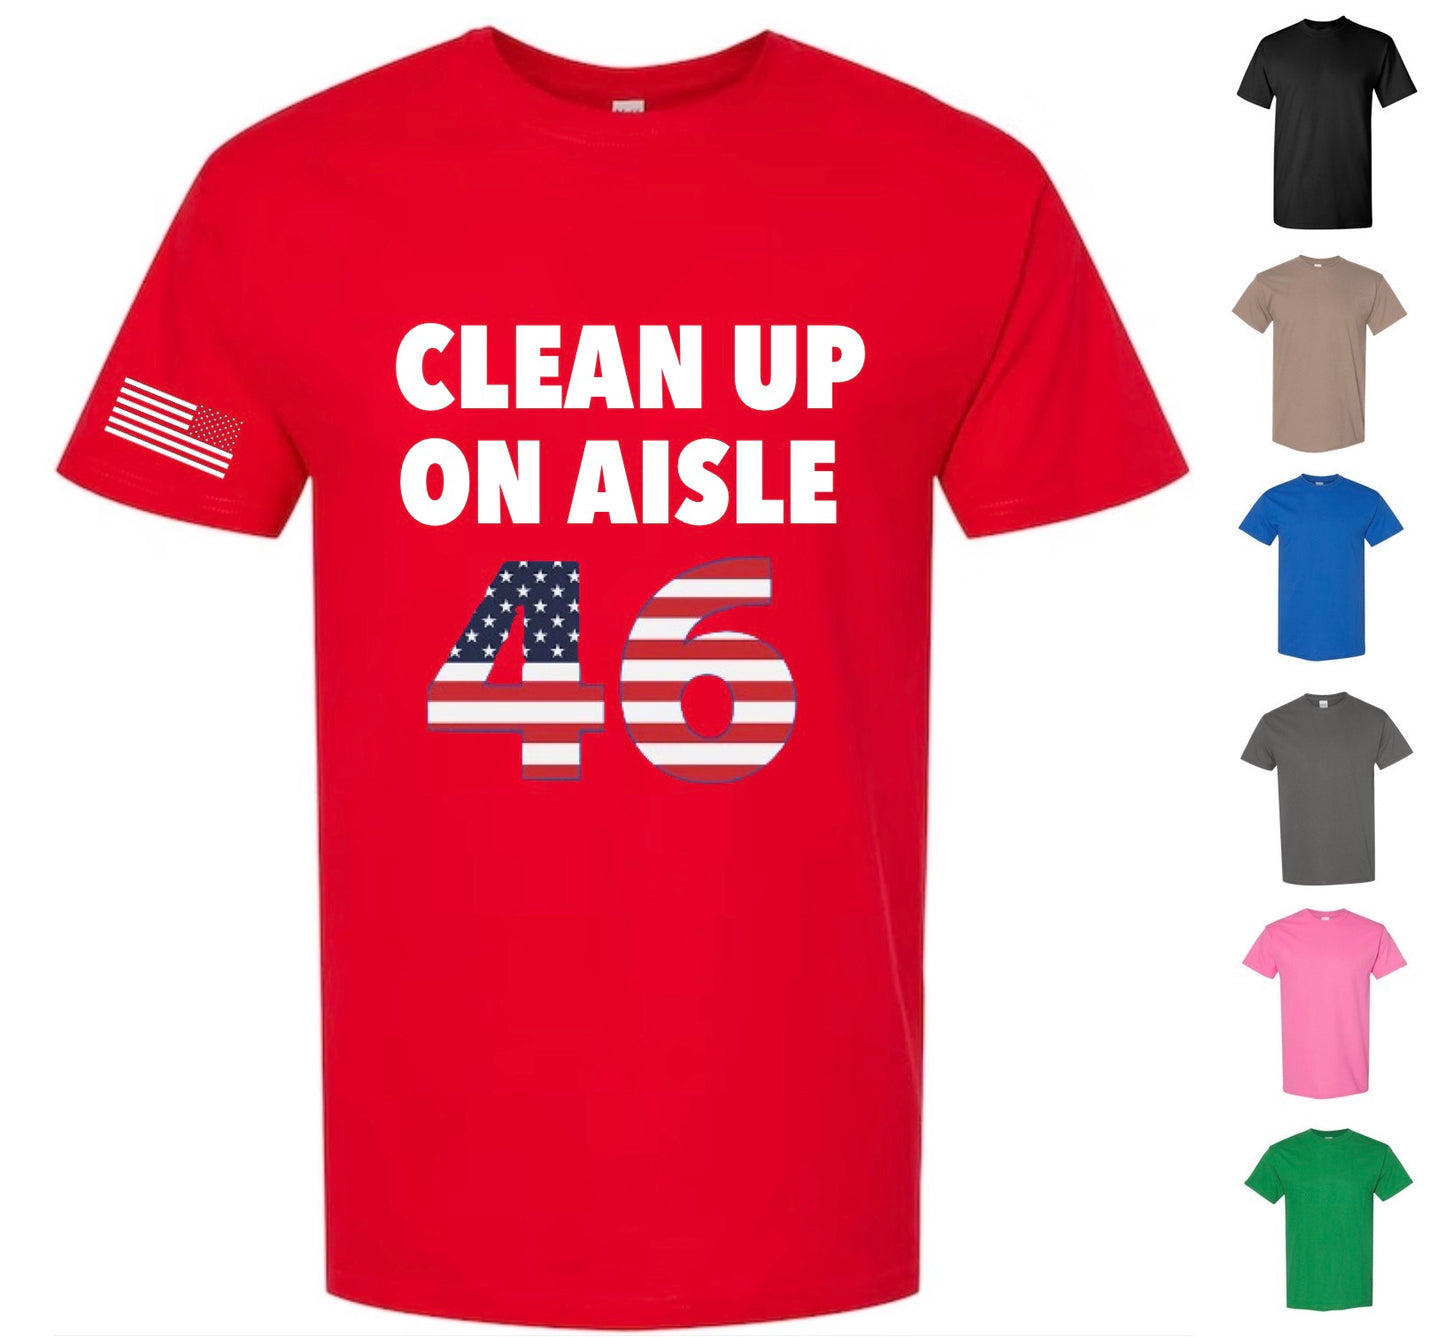 Clean Up On Aisle 46! — Free Shipping!